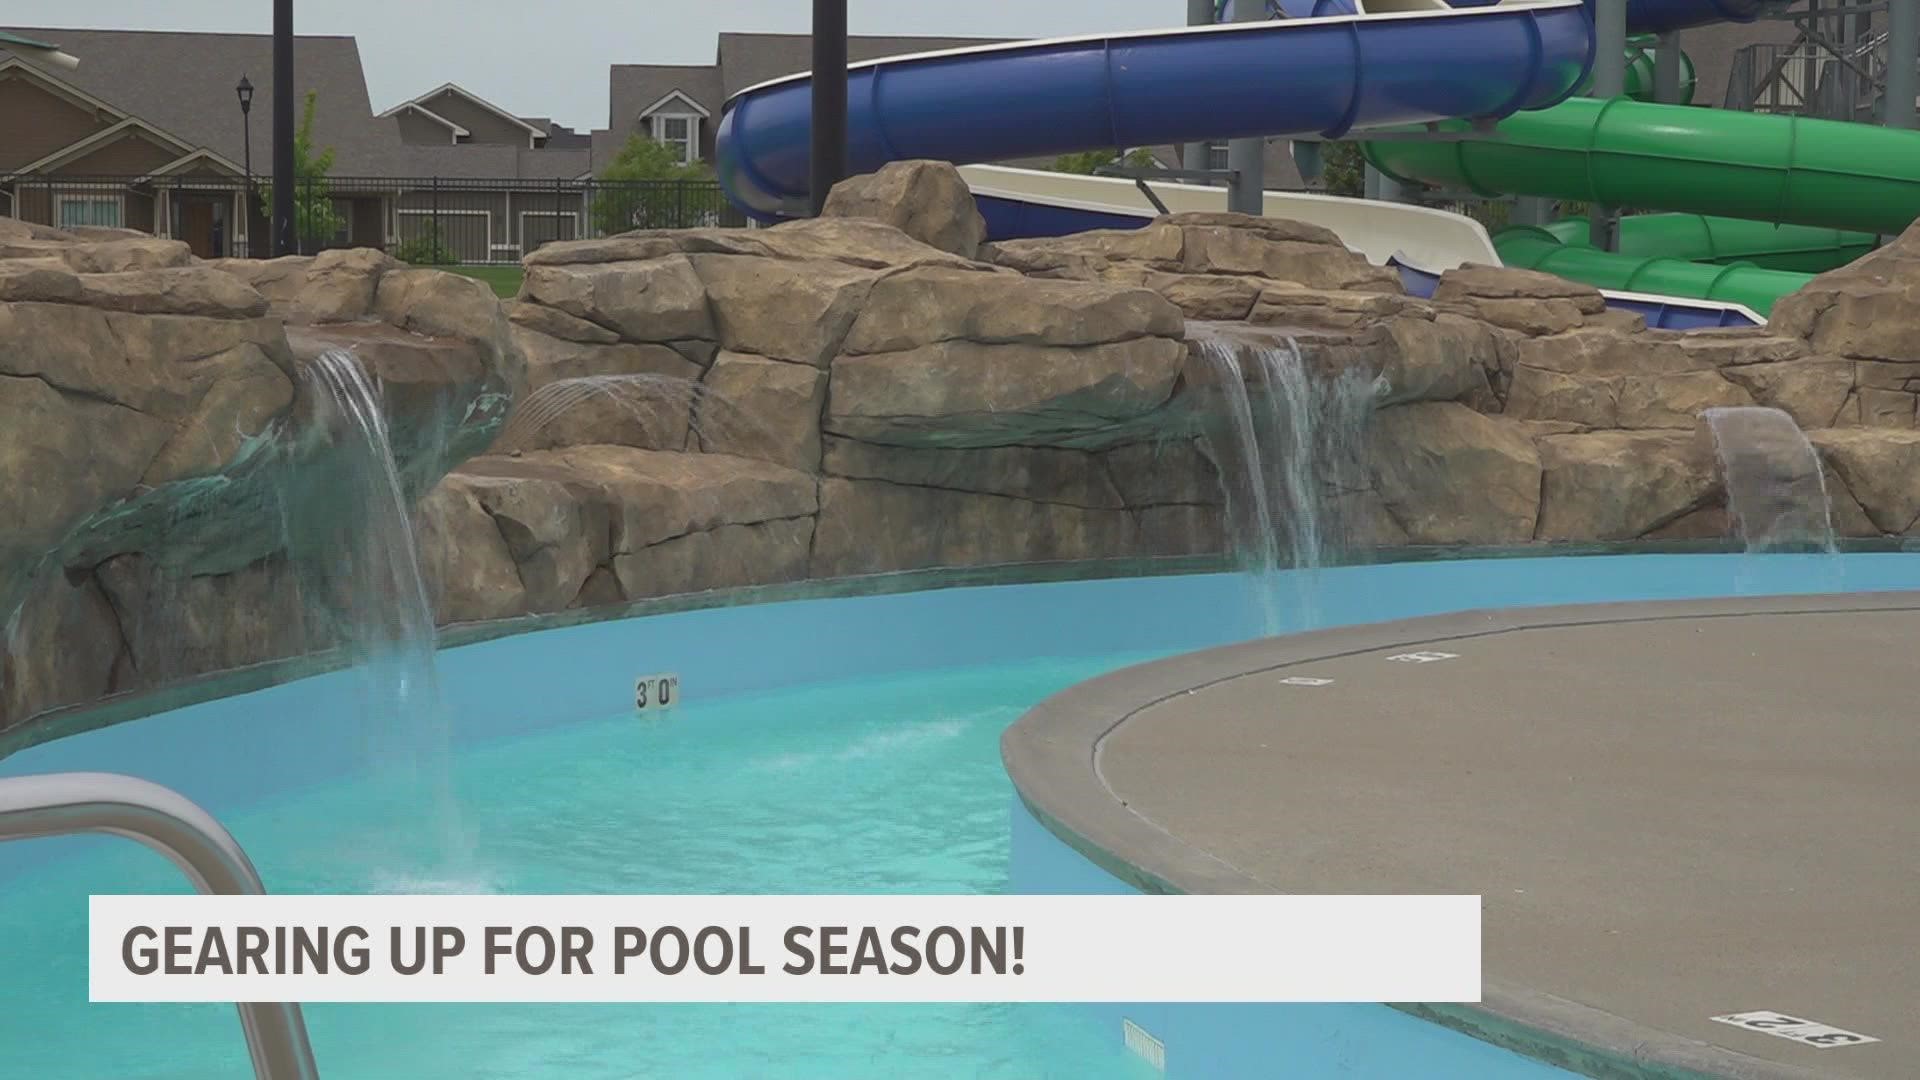 "We usually try and operate between seven to nine employees. And right now we're currently at three certified lifeguards," said Bryant Rasmussen.